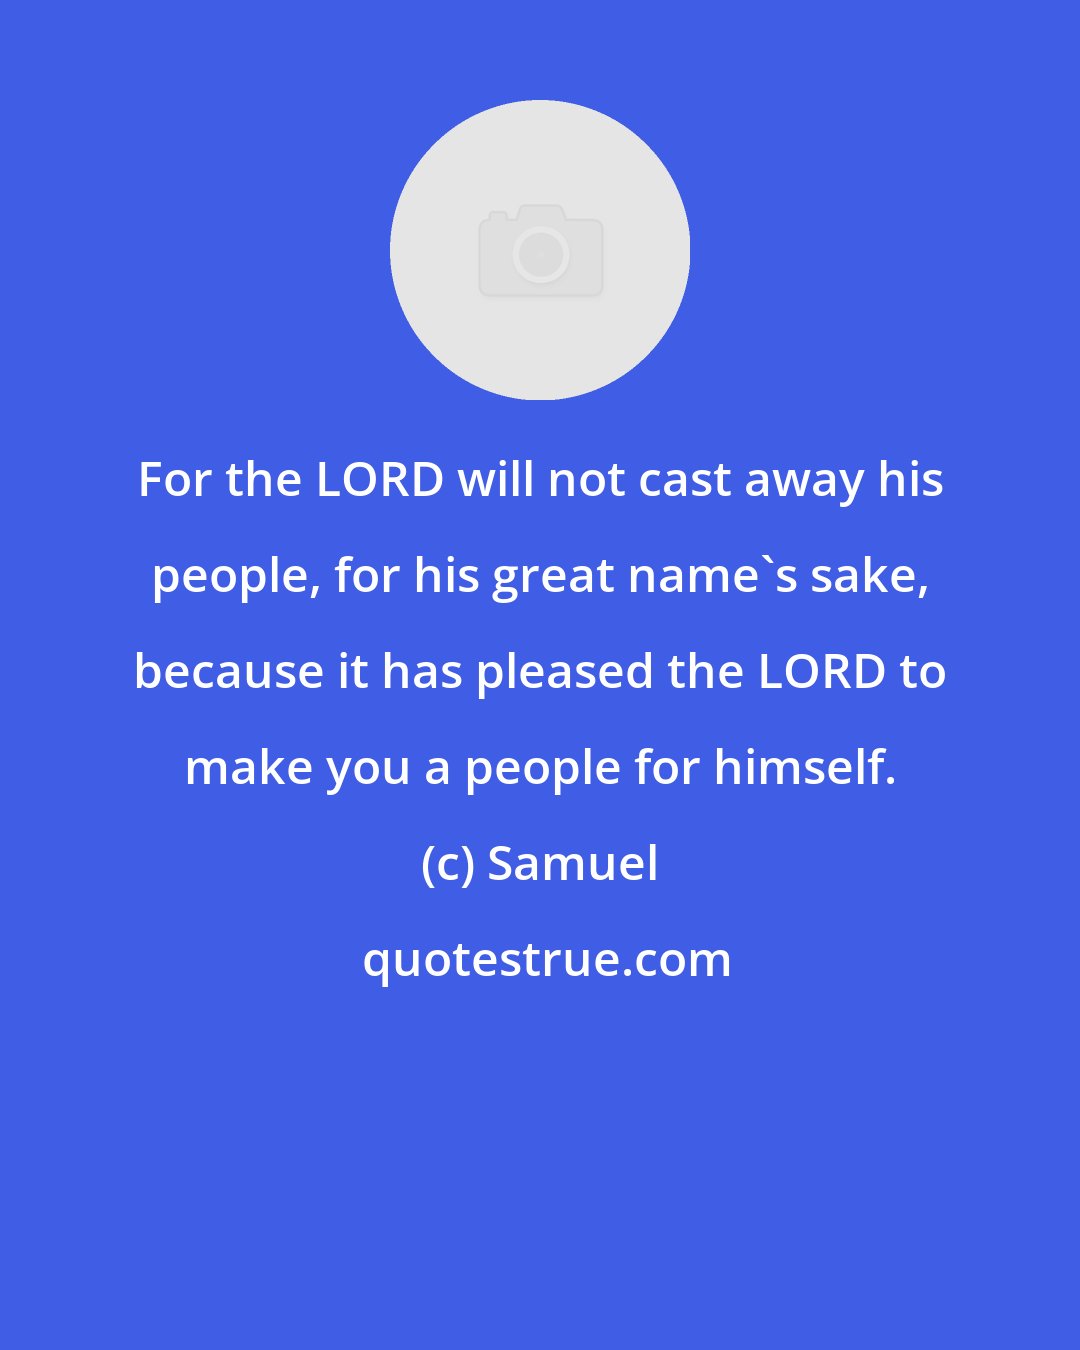 Samuel: For the LORD will not cast away his people, for his great name's sake, because it has pleased the LORD to make you a people for himself.